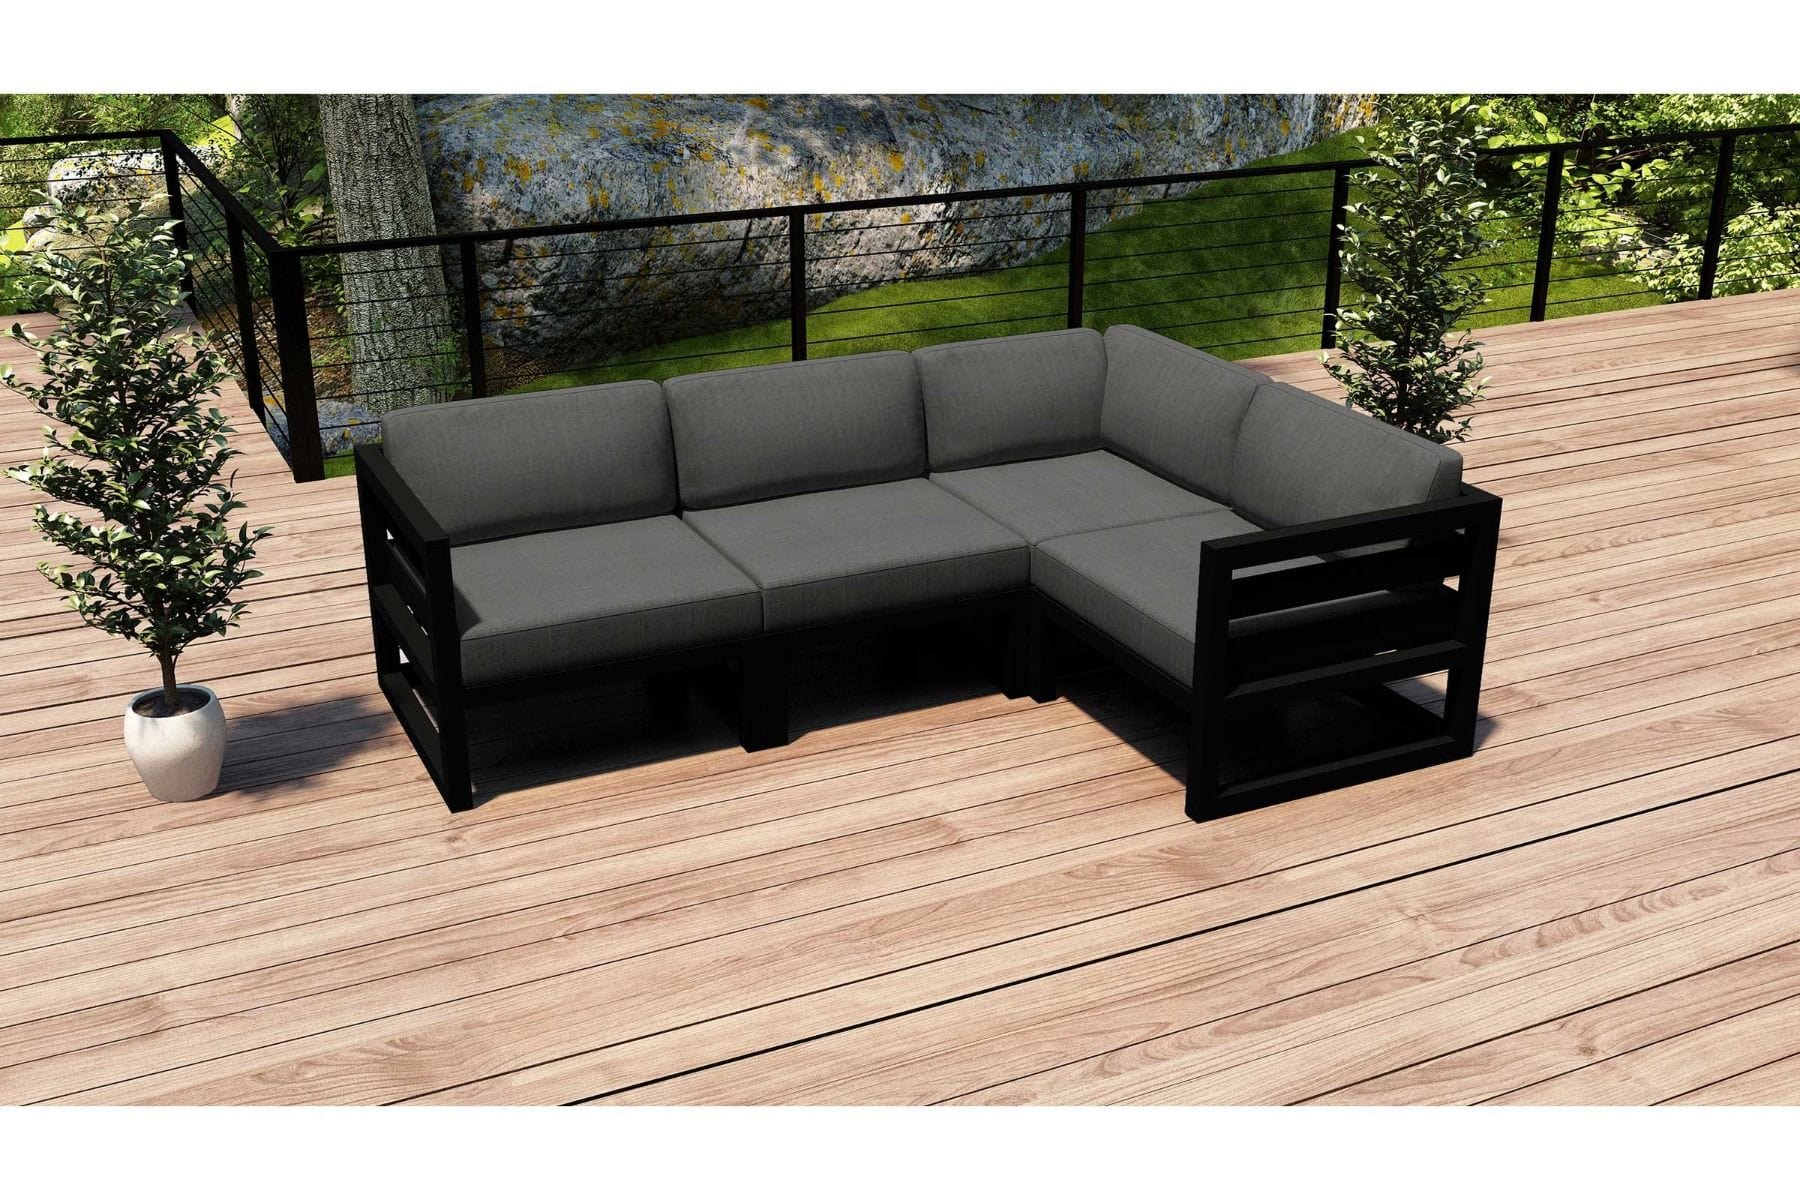 Harmonia Living Outdoor Sectional Harmonia Living - Avion 4 Piece Sectional Set | Corner, Middle, Left and Right | HL-AVN-BK-4SEC